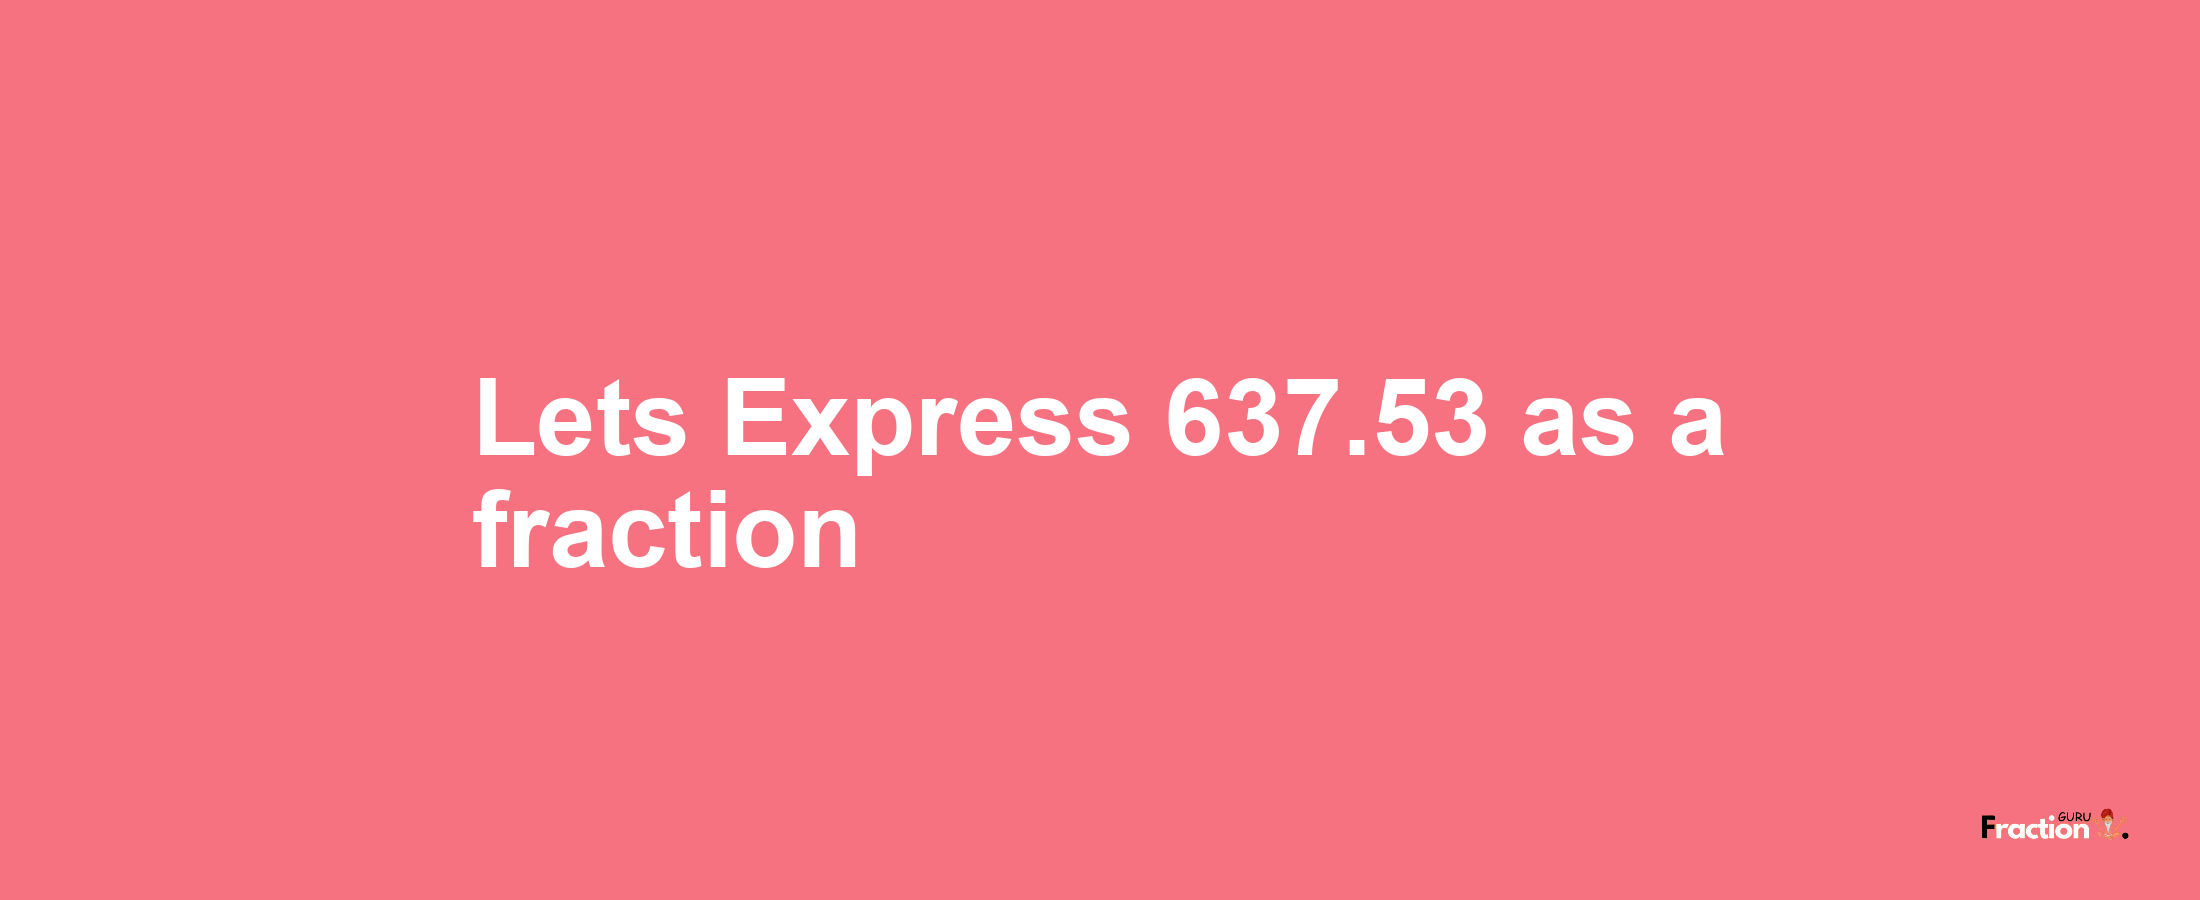 Lets Express 637.53 as afraction